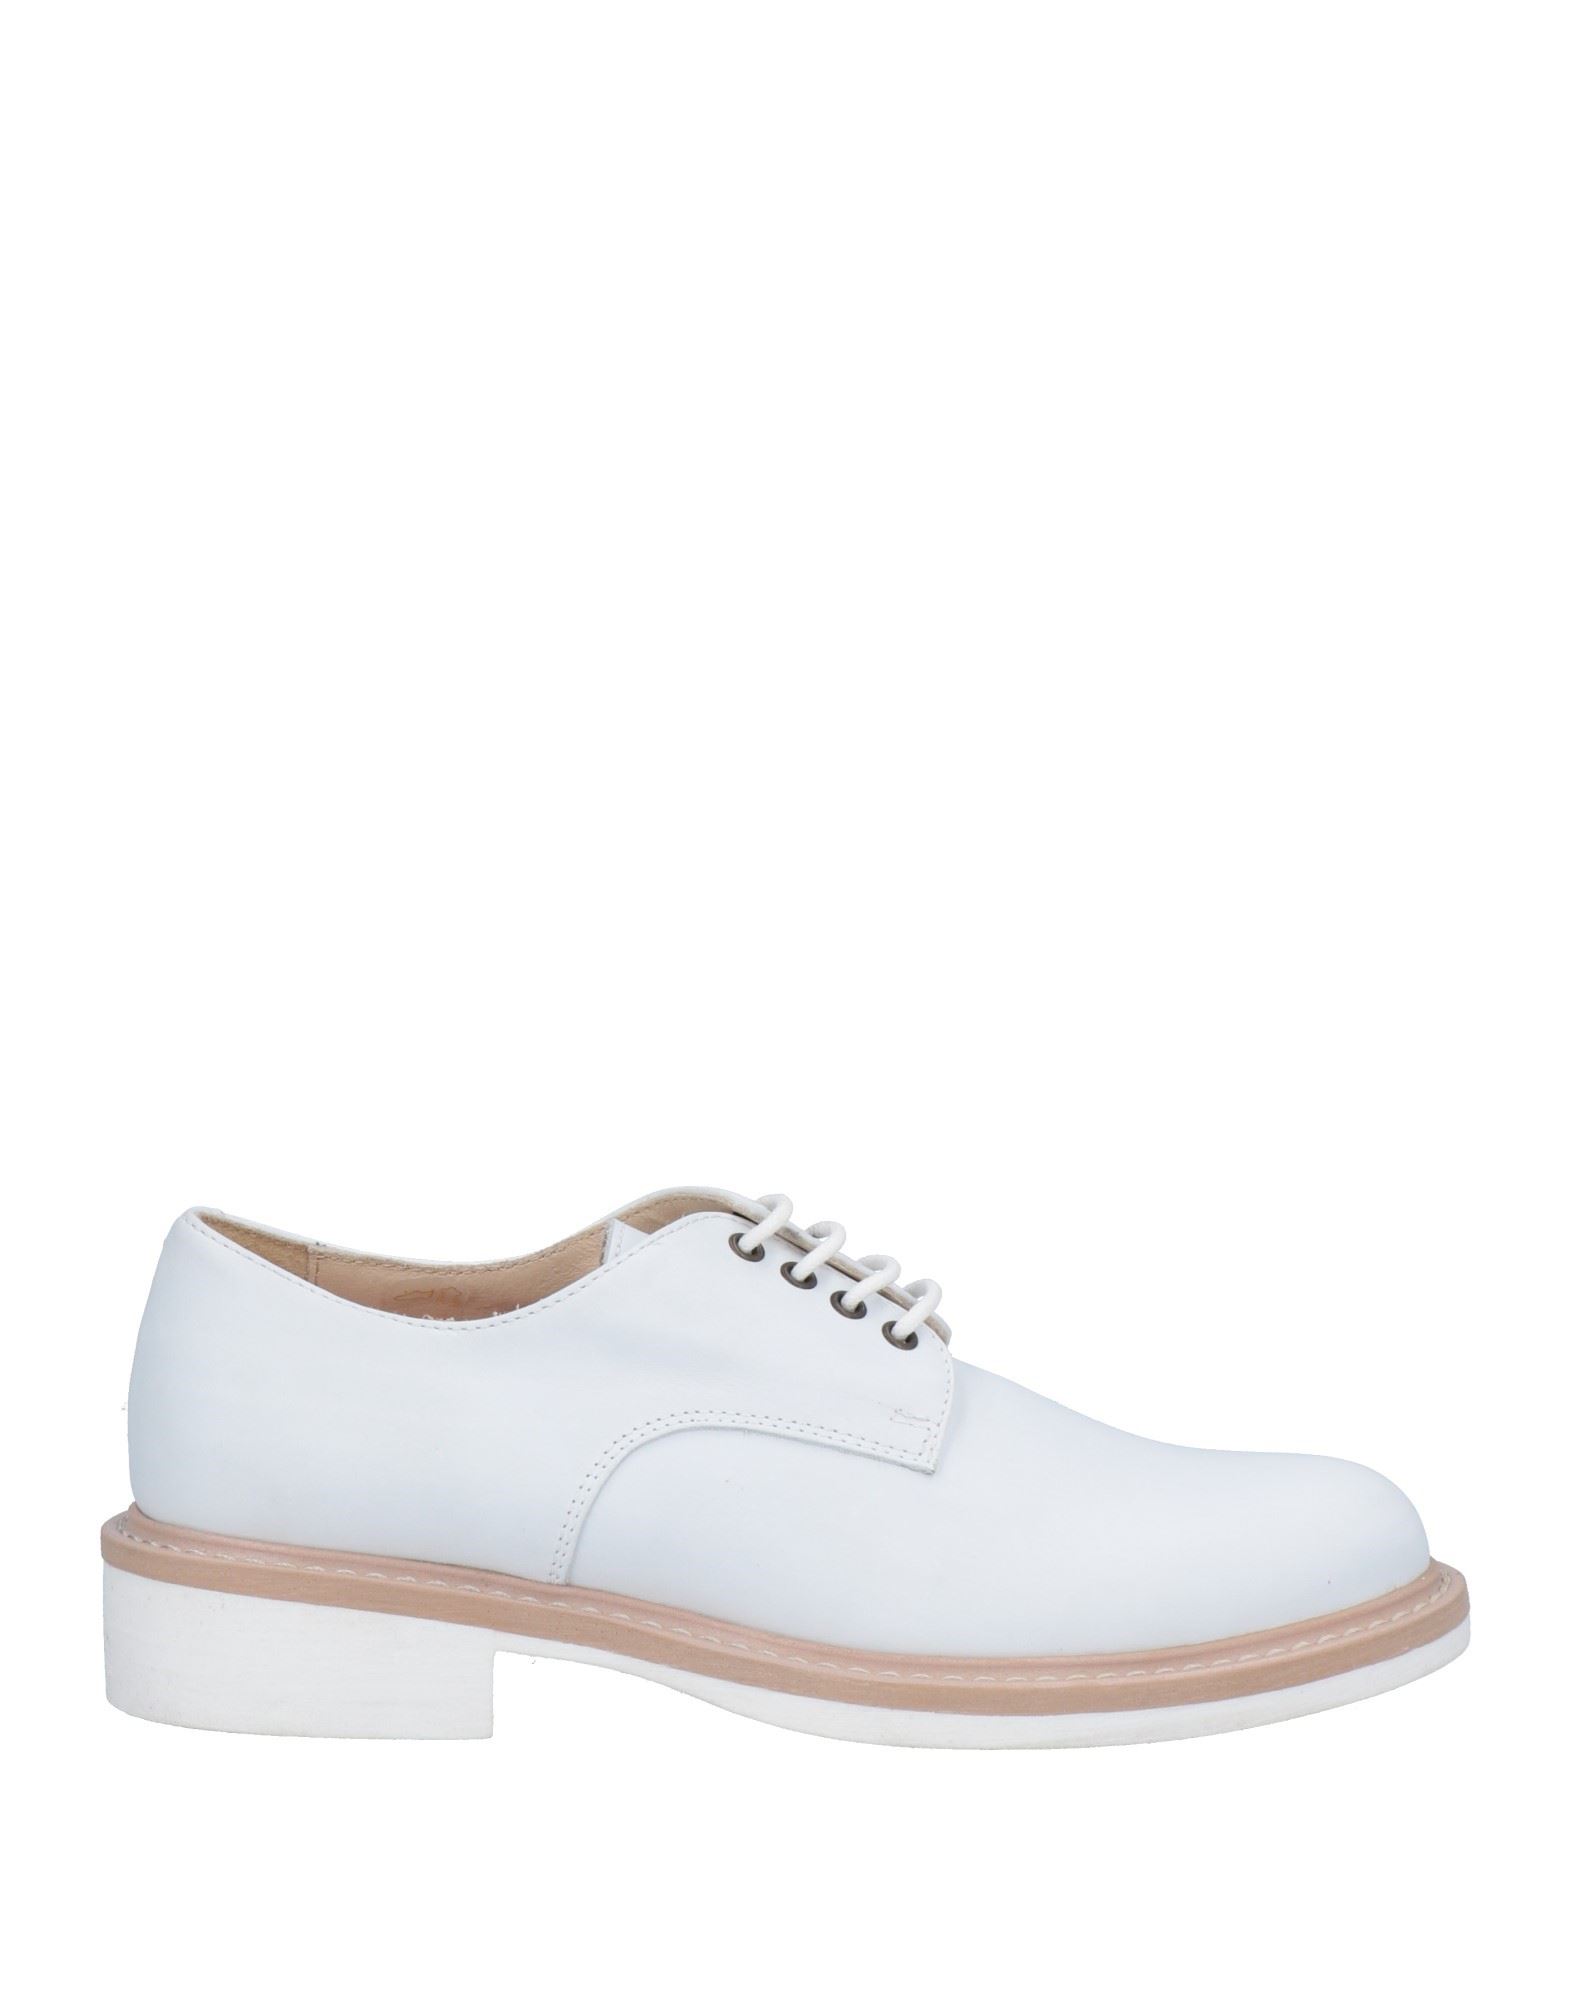 Studio Pollini Lace-up Shoes In White